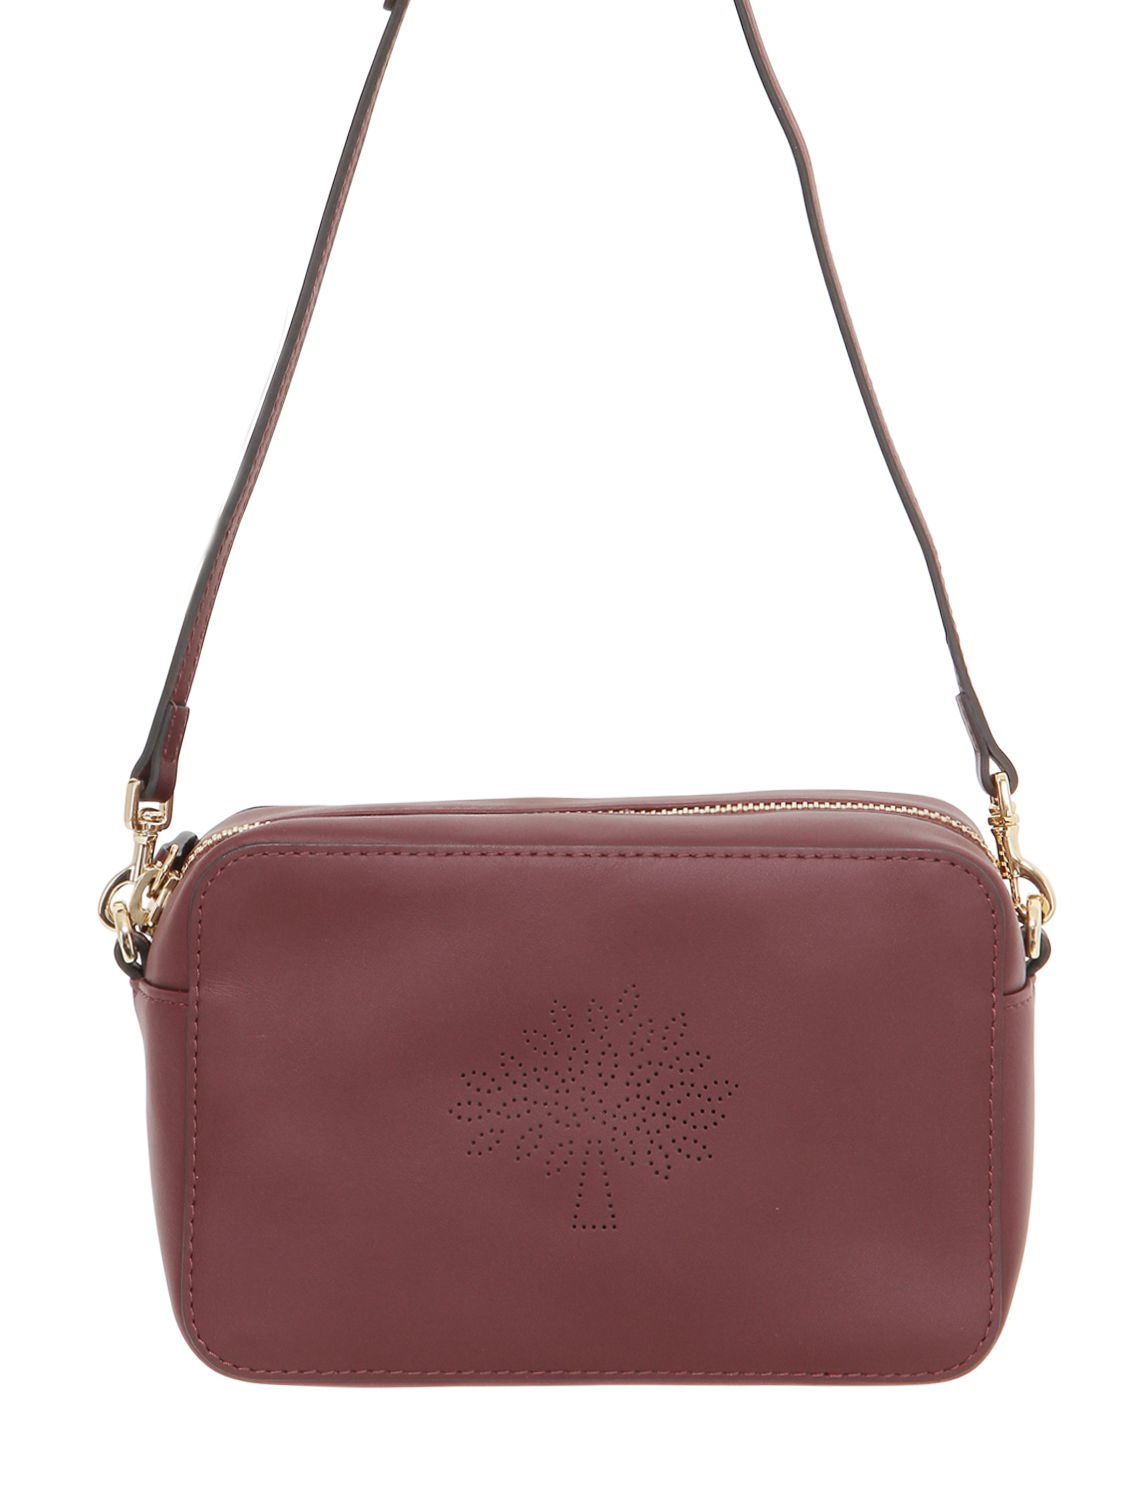 Mulberry Blossom Perforated Nappa Shoulder Bag in Purple (BURGUNDY) | Lyst